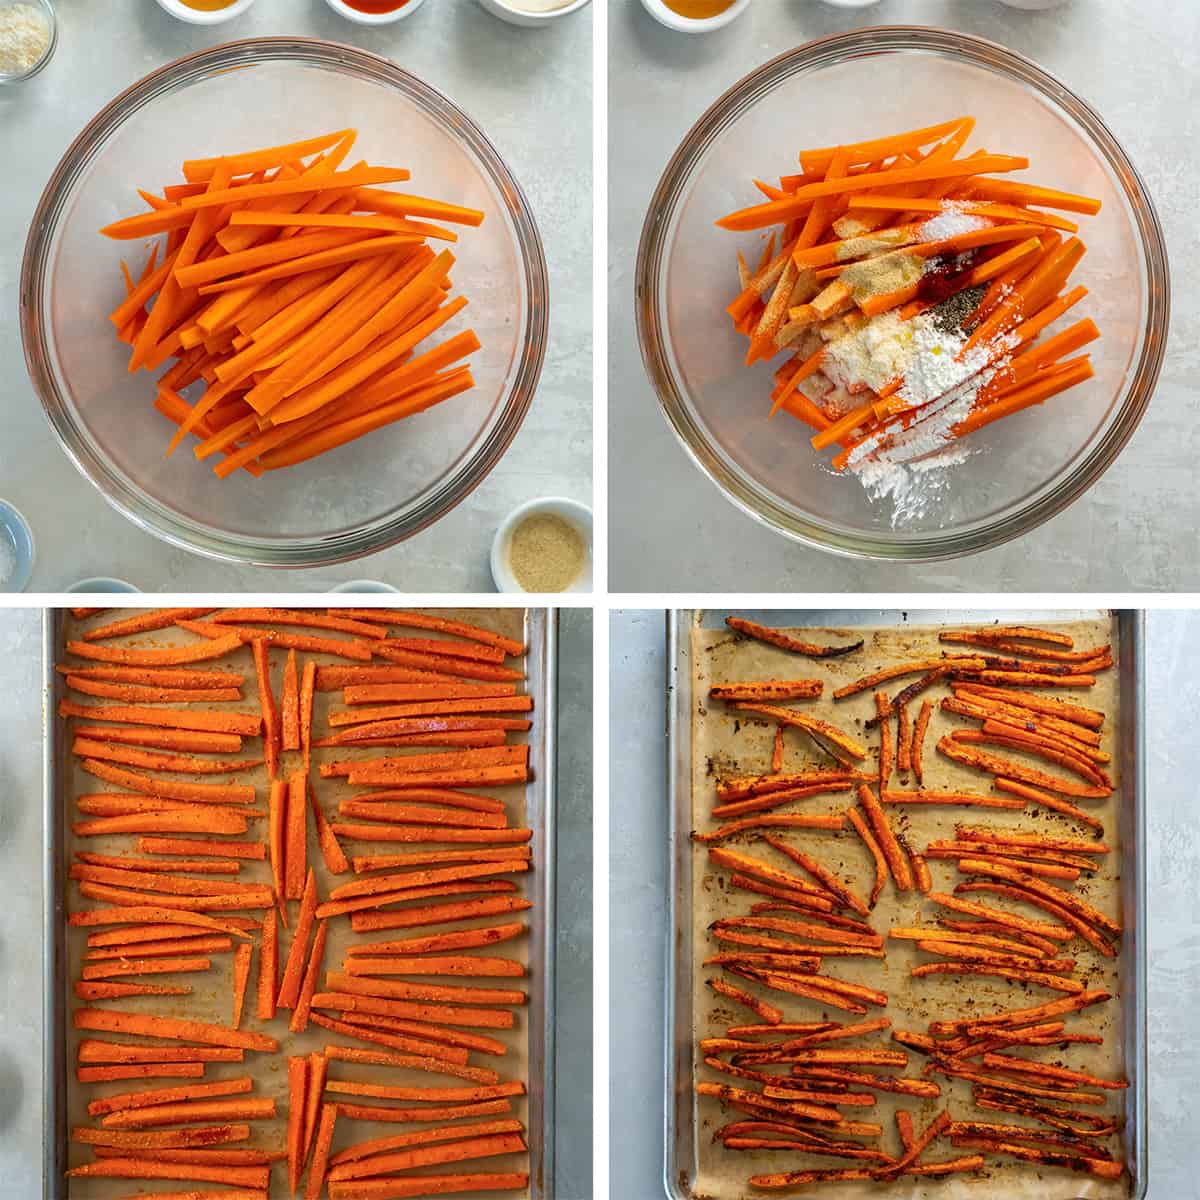 Four images of carrot sticks in a bowl with spices and spread out on a baking sheet.